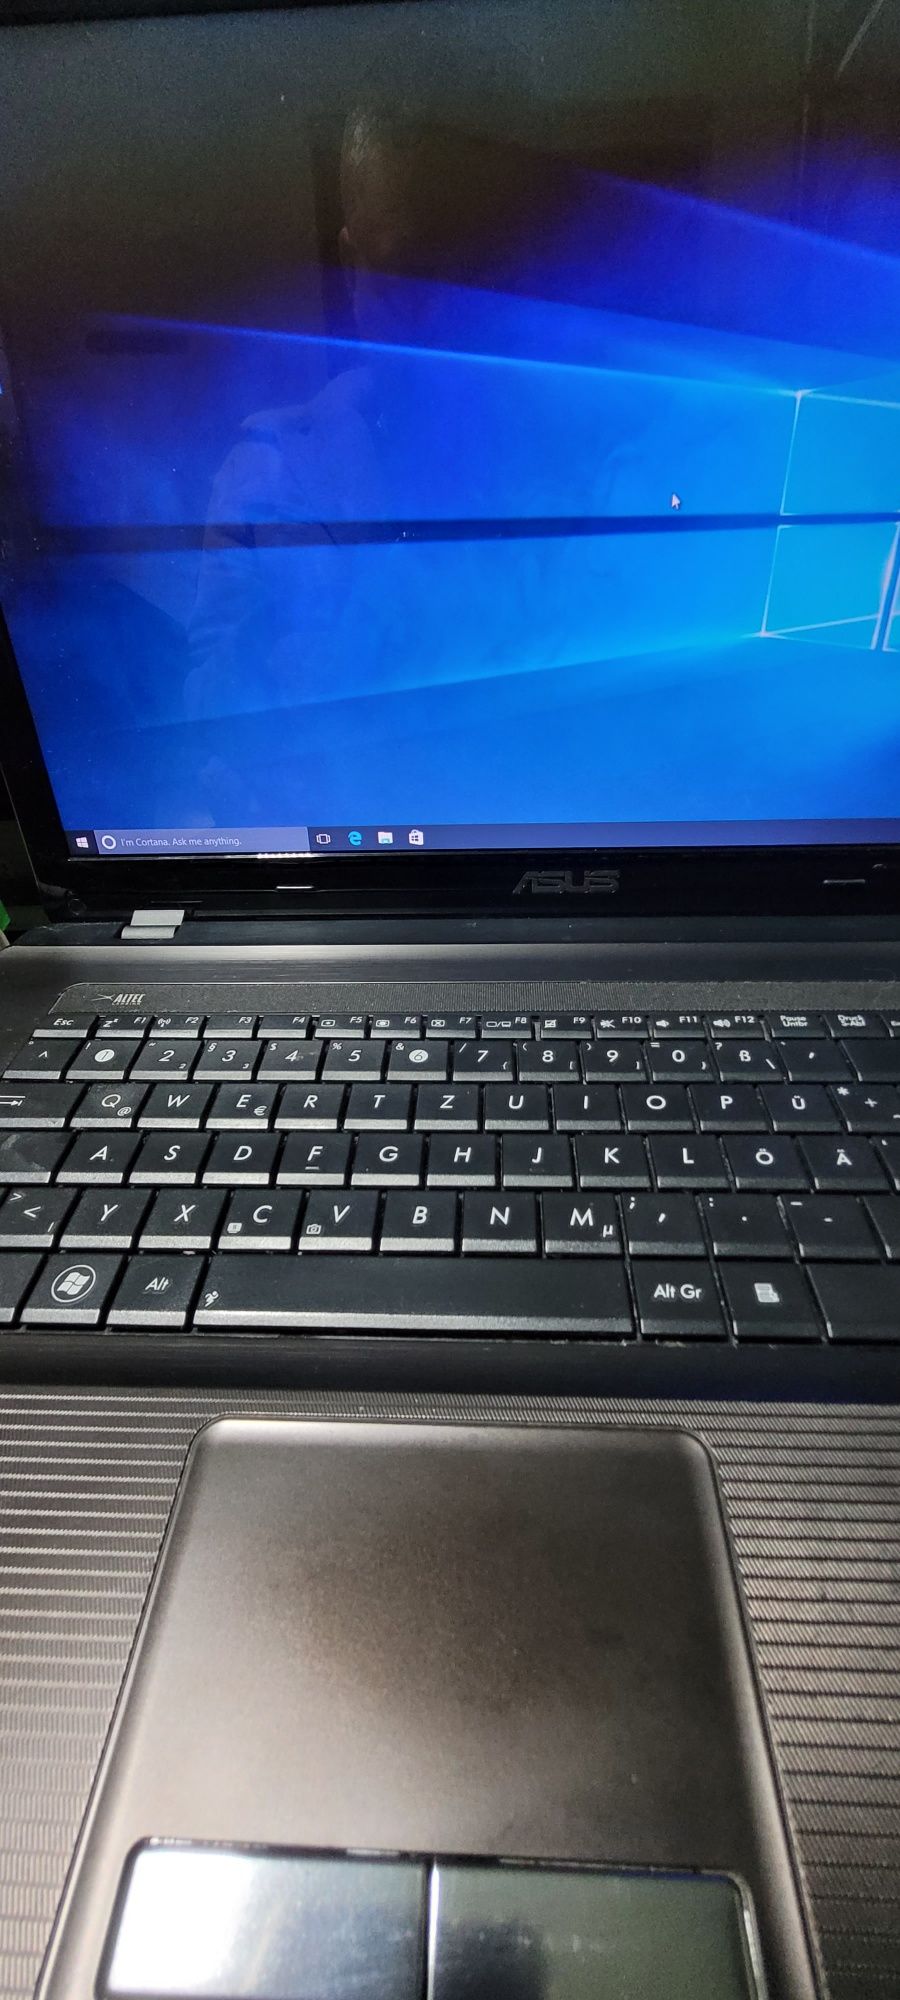 Laptop asus 17 inch, 4gb ddr3, video 1gb, dual core